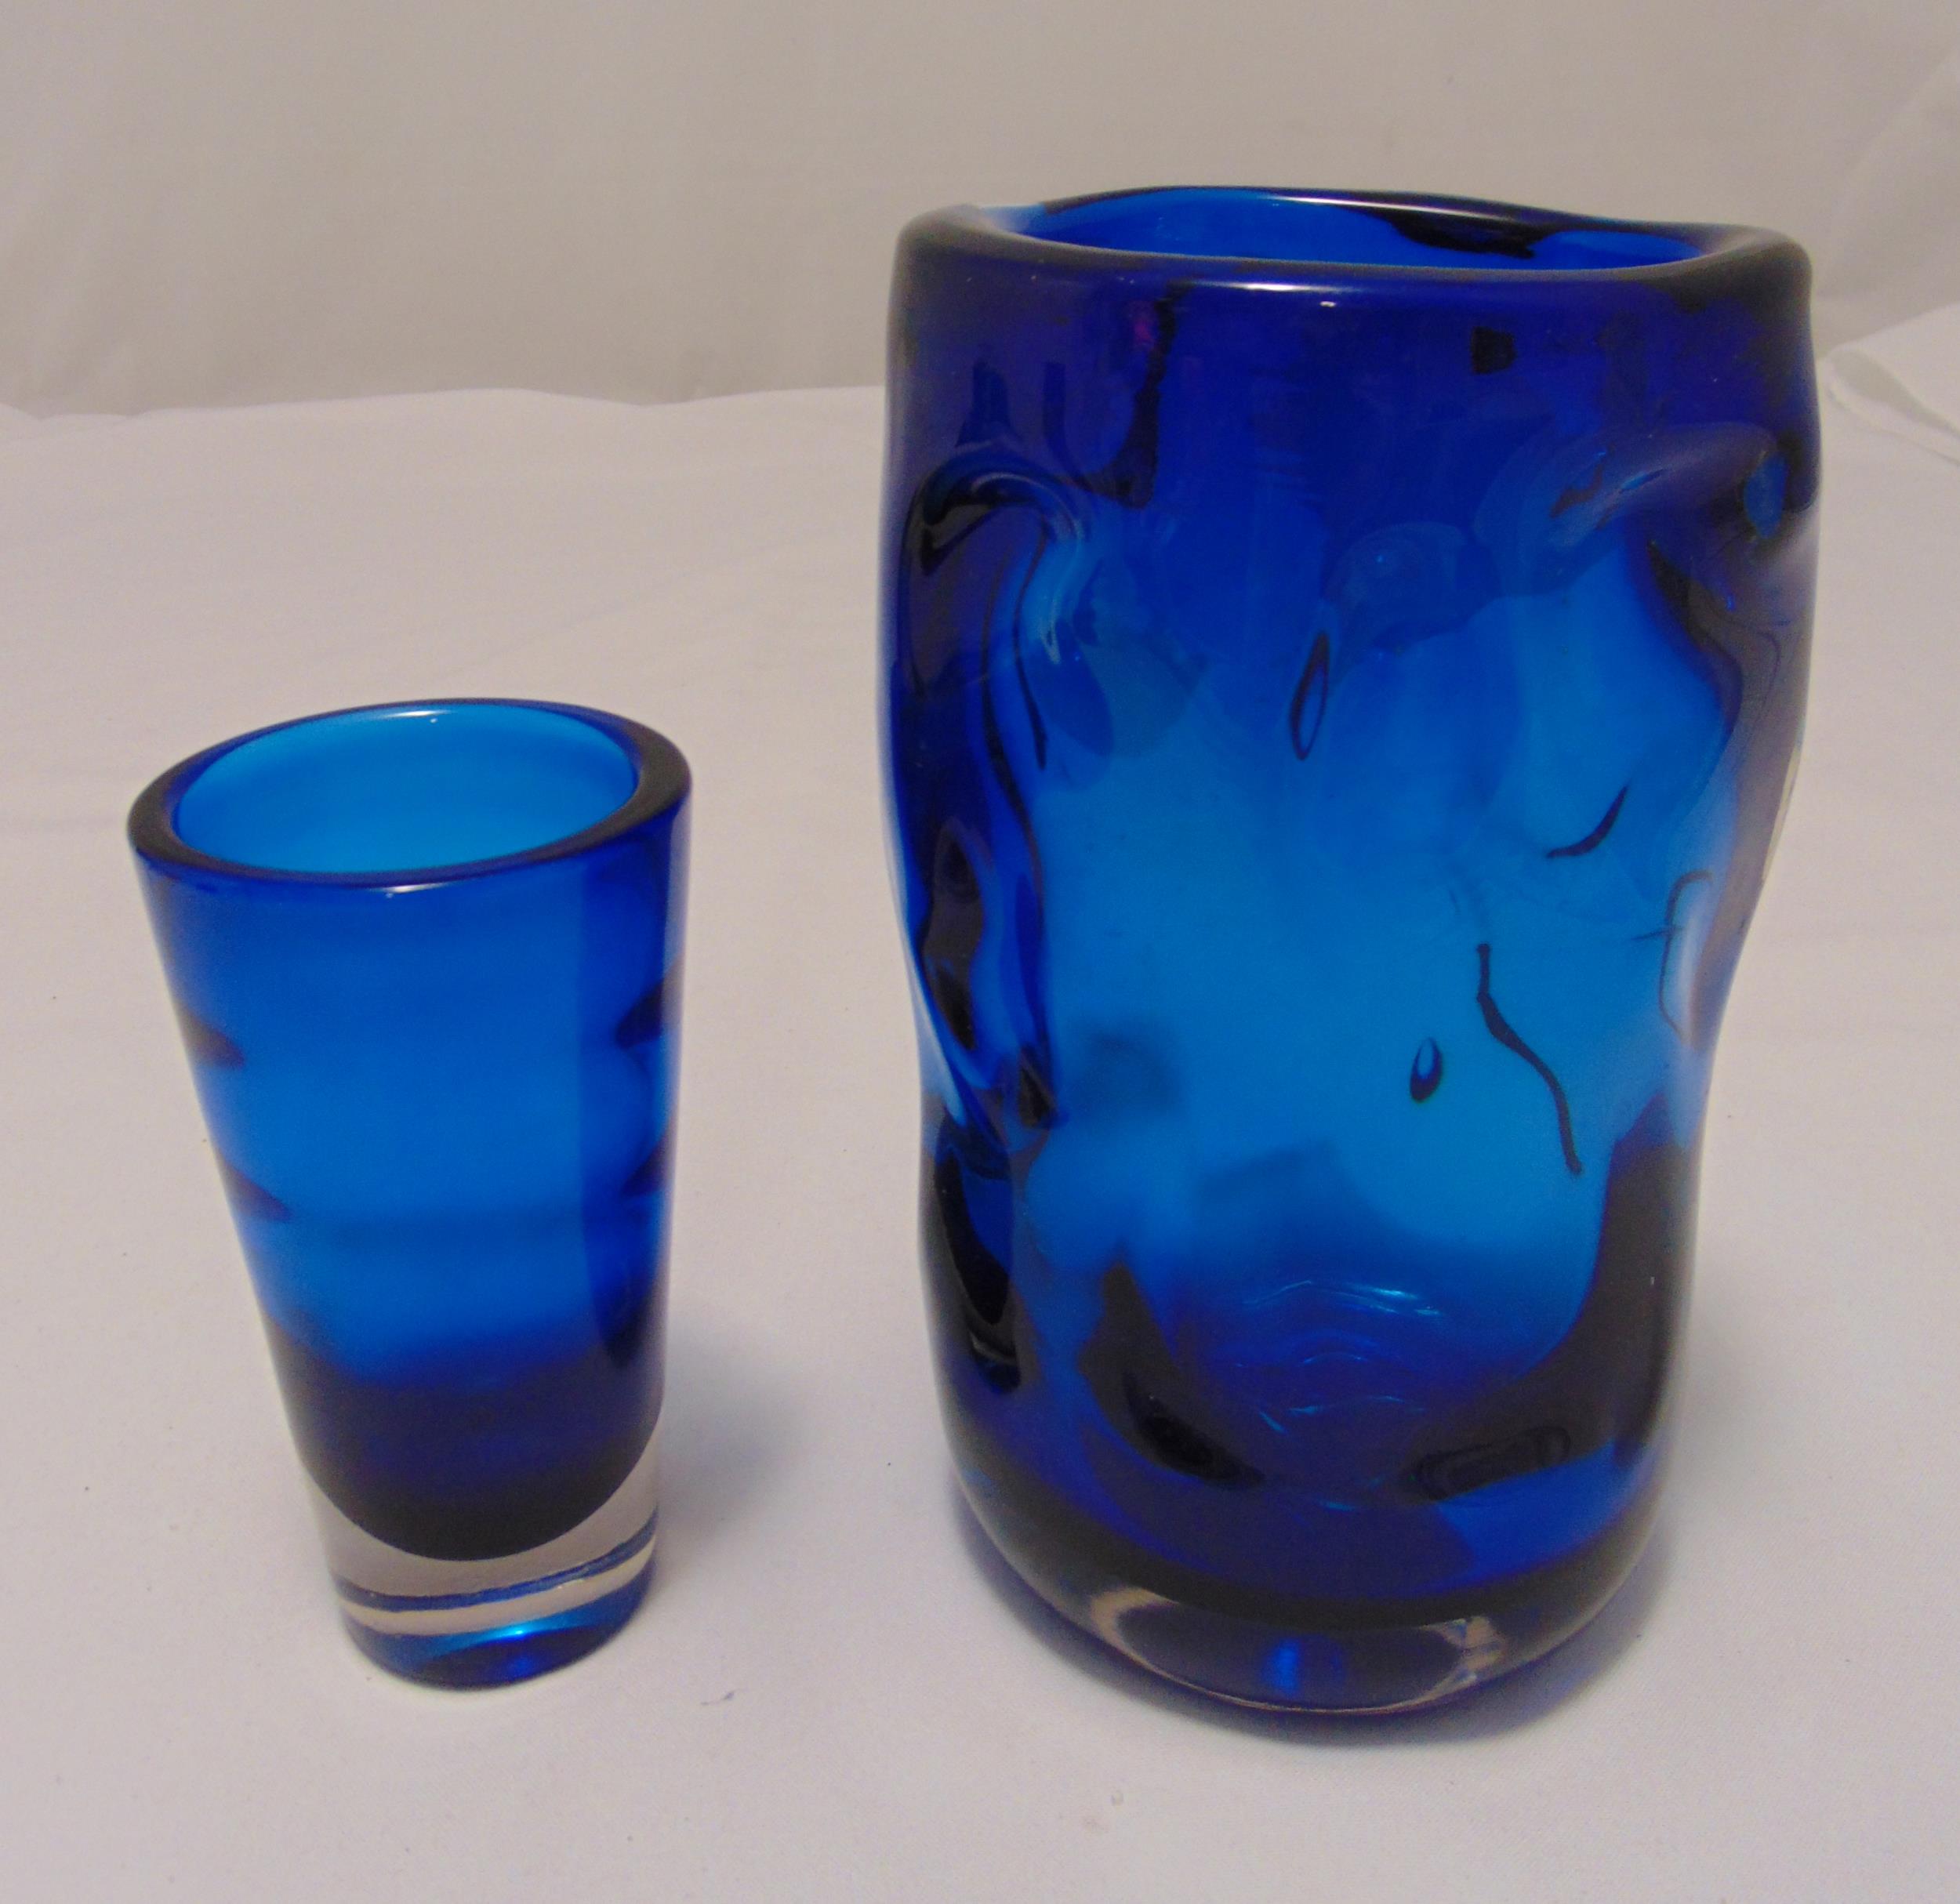 Whitefriars blue knobbly glass vase and another blue glass vase, tallest 22cm (h)